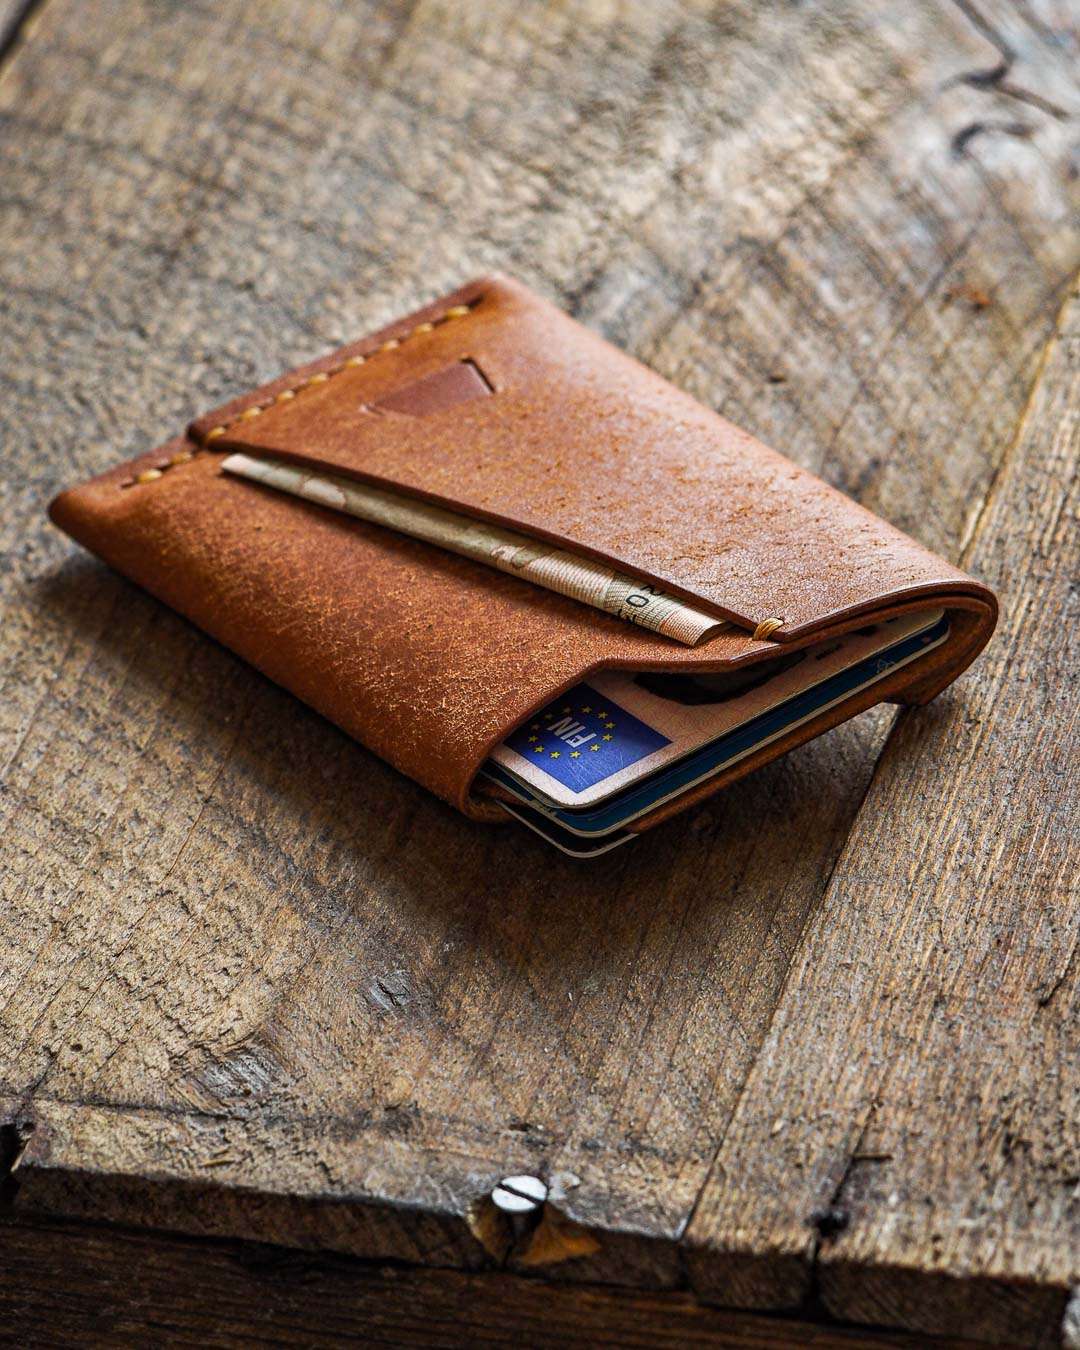 Luava handmade leather wallet handcrafted card holder cardholder made in finland vortex badalassi pueblo cognac front in use angle